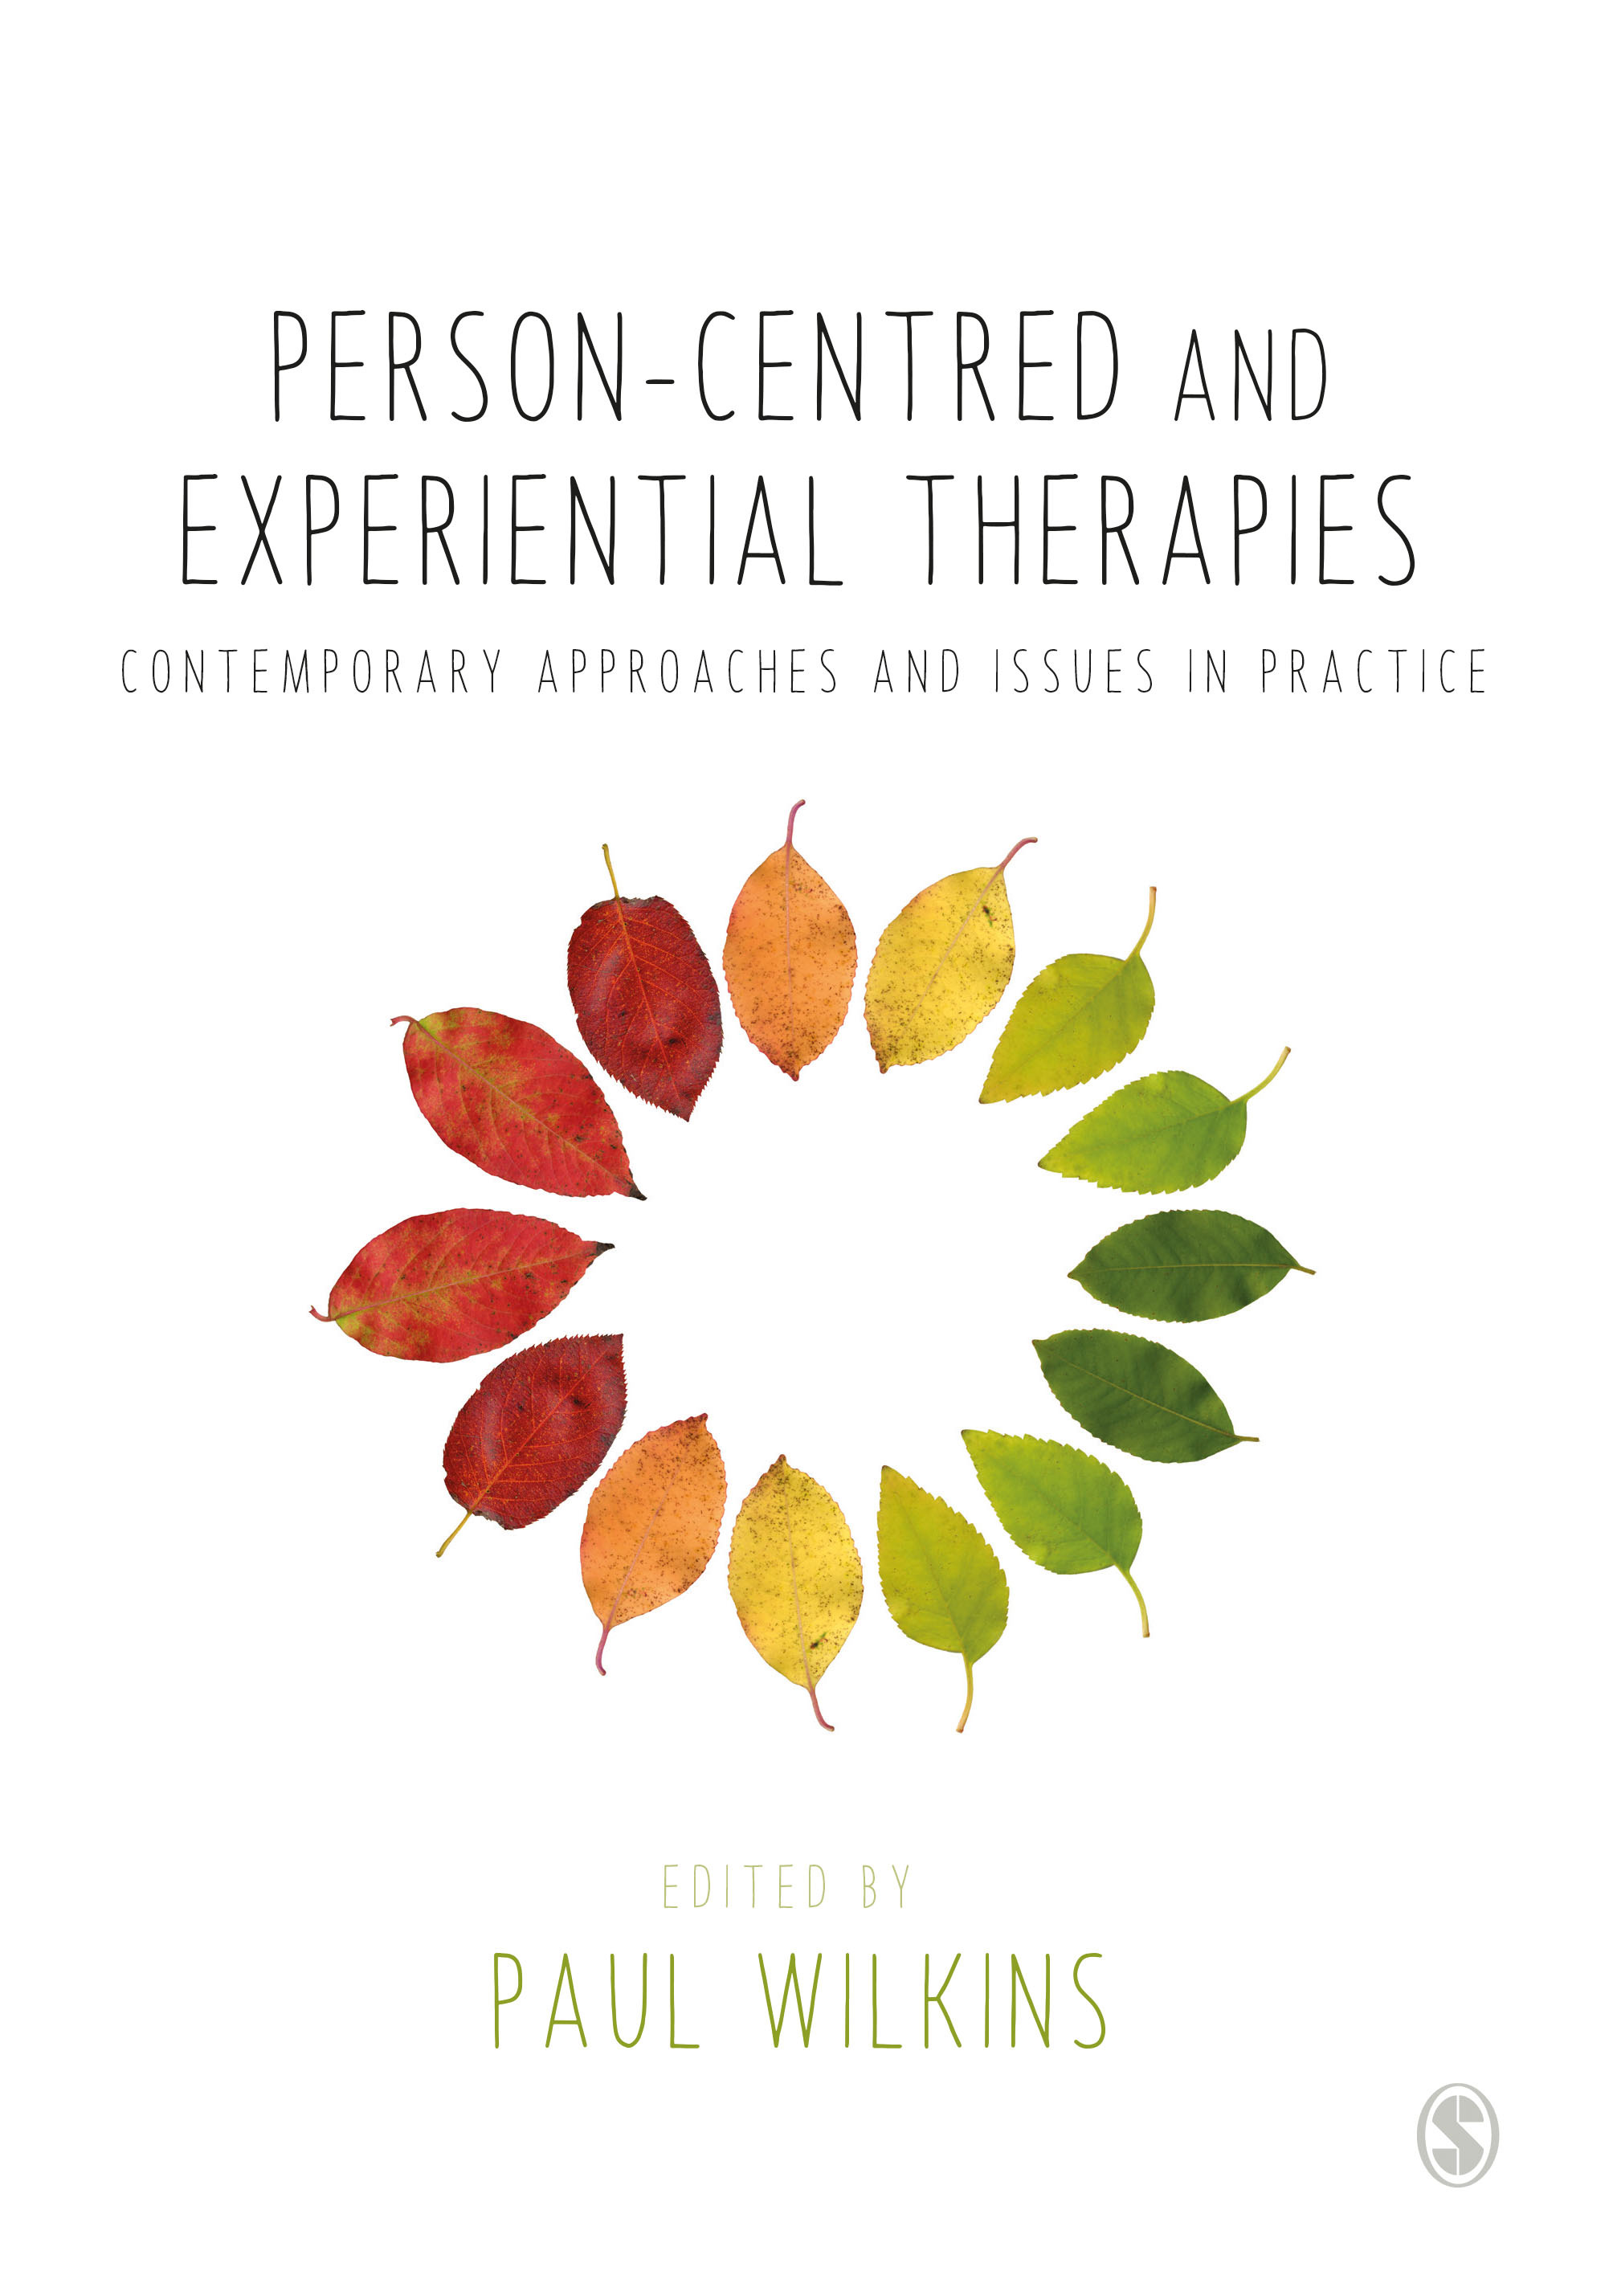 Person-centred and Experiential Therapies: Contemporary Approaches and Issues in Practice book cover image 